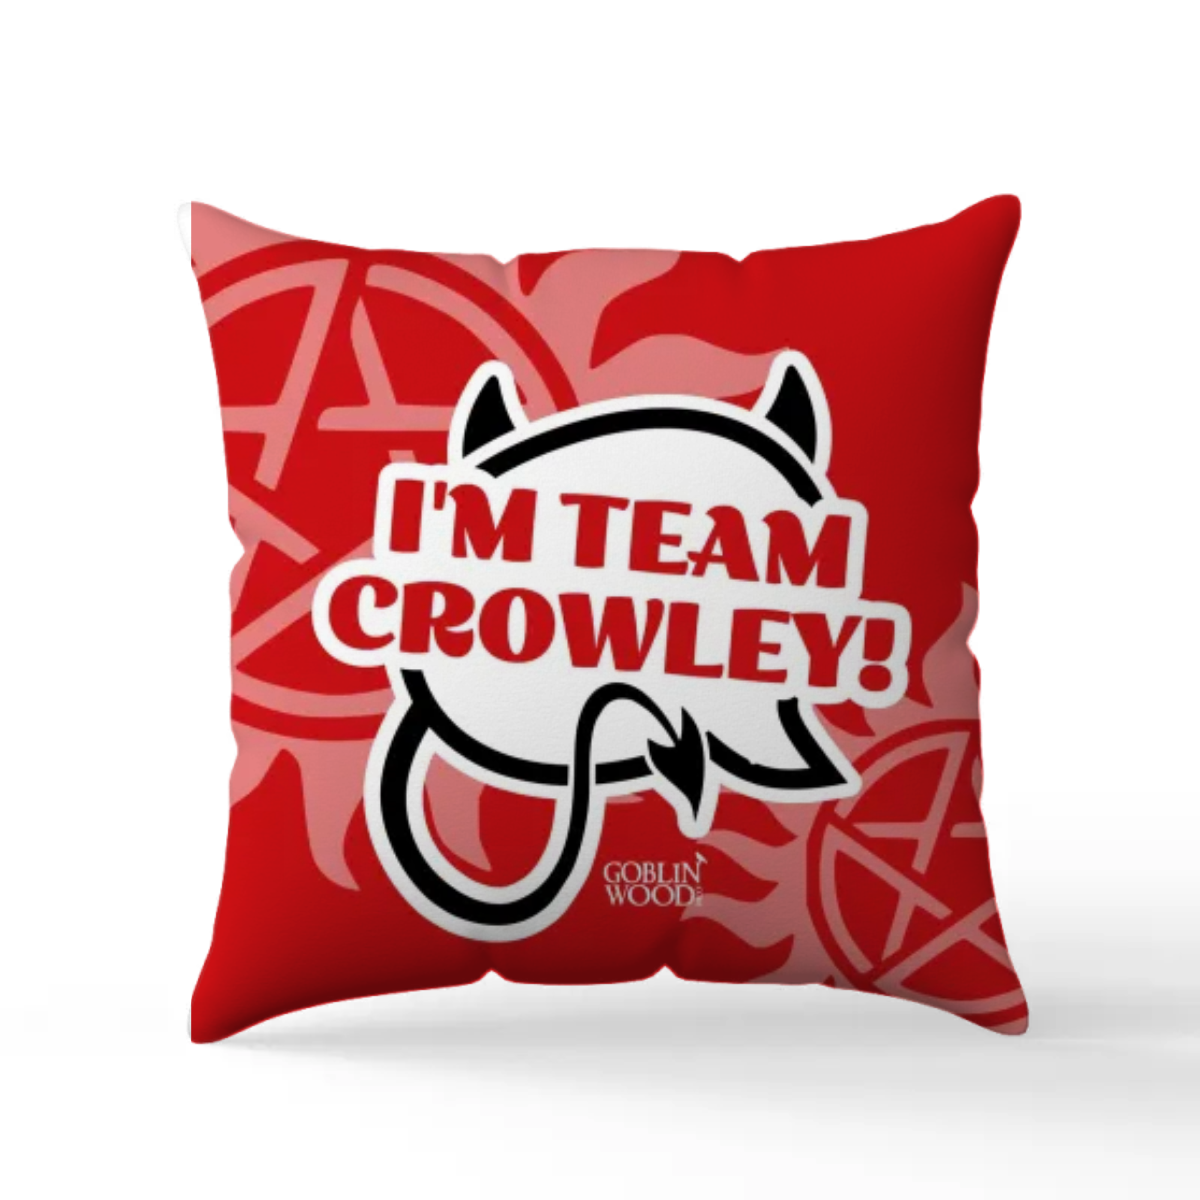 I'm Team Crowley! Scatter Cushion - Supernatural Inspired Goblin Wood Exclusive